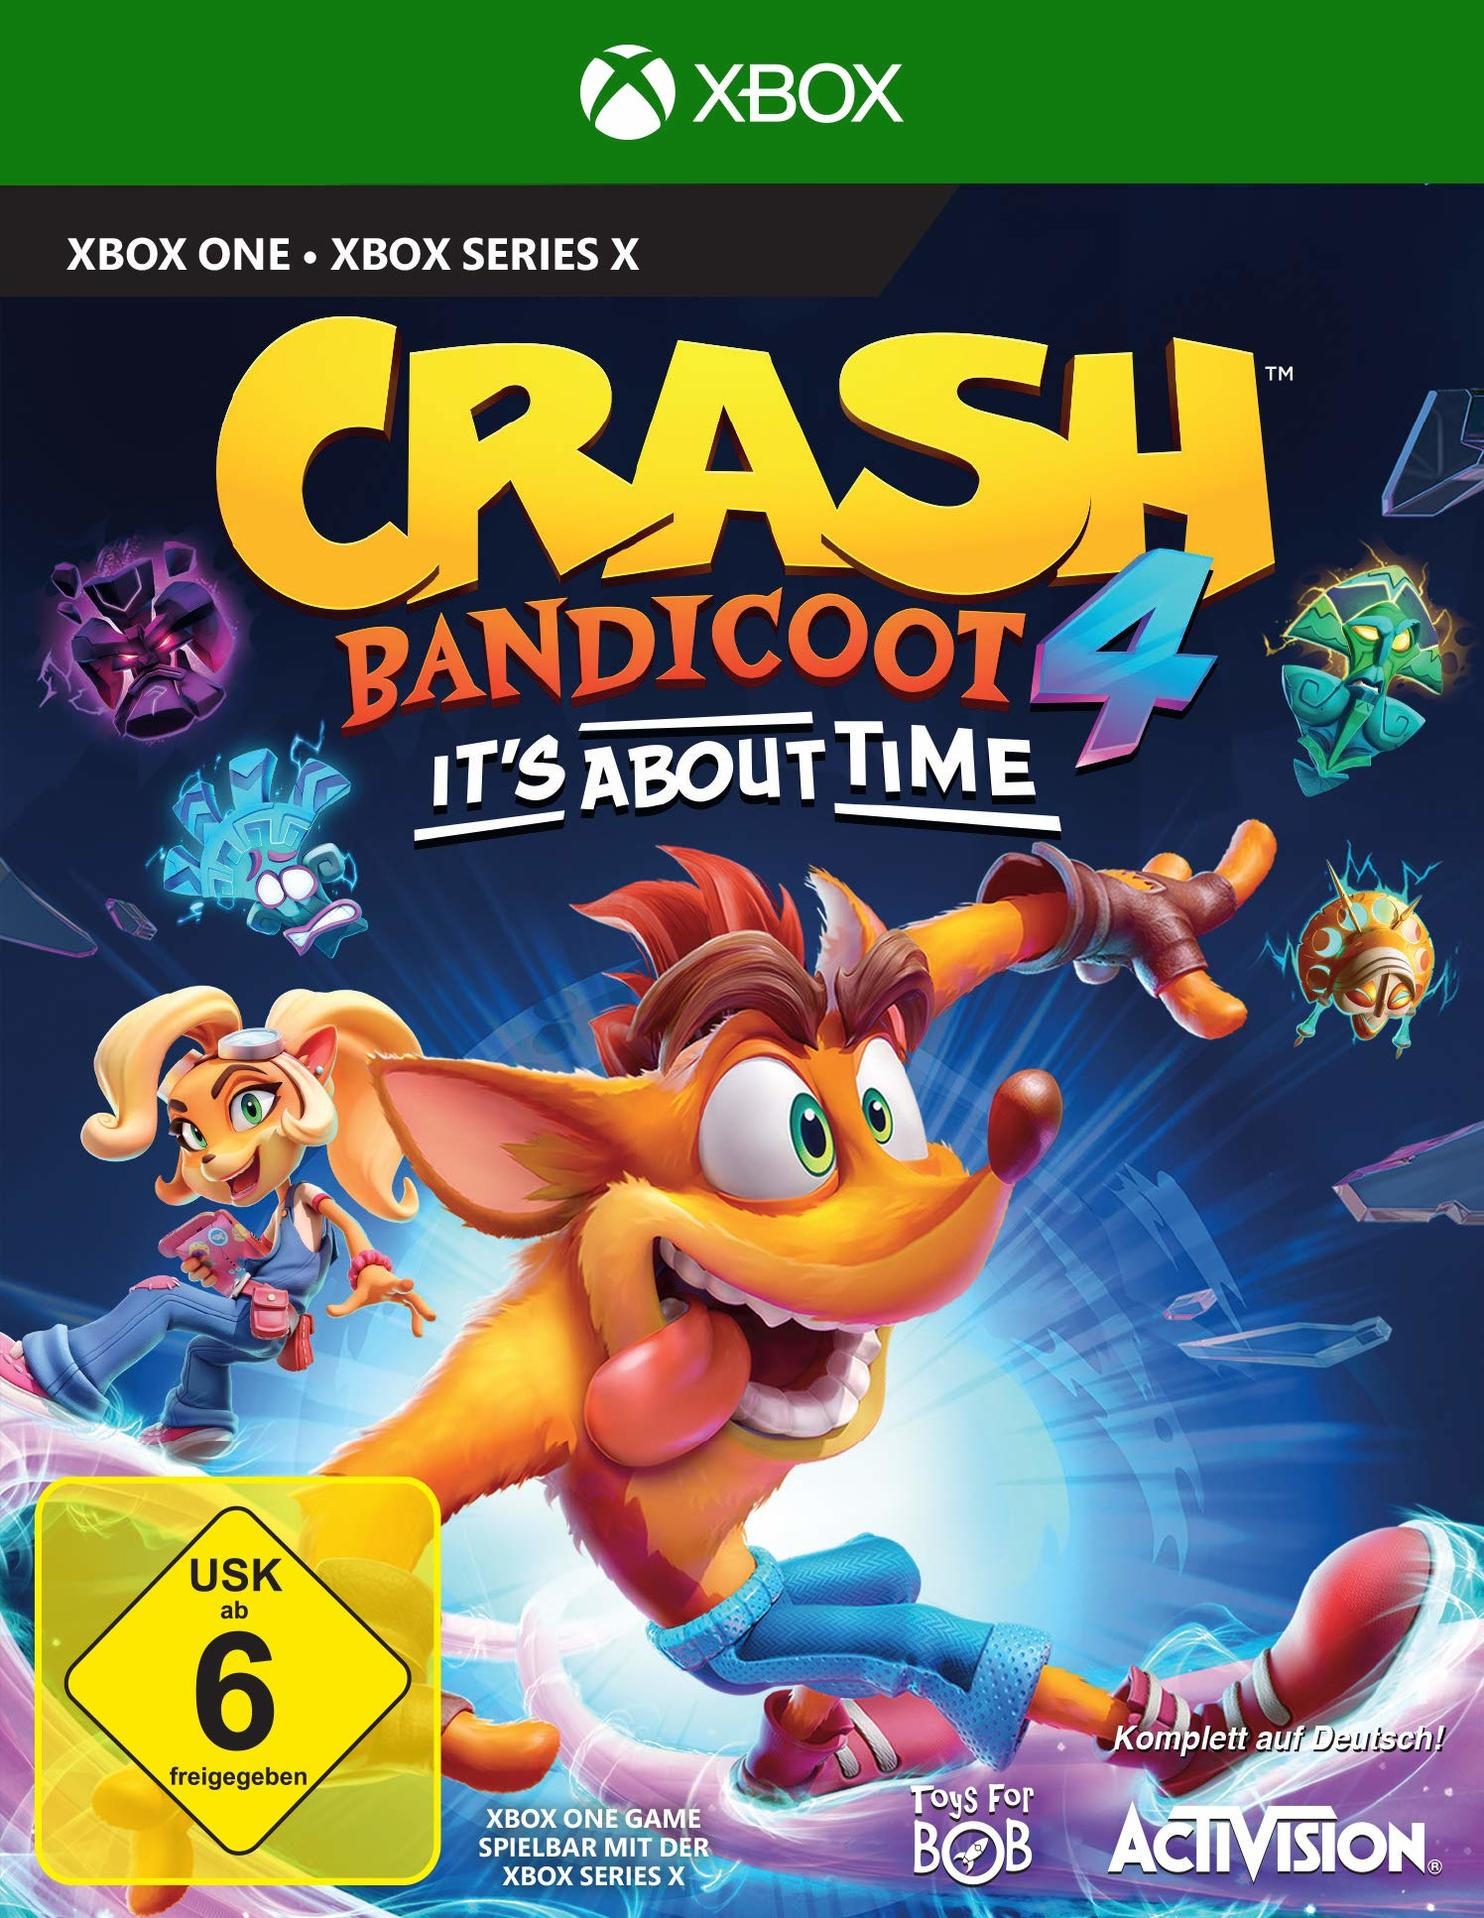 Time It\'s Bandicoot One] About [Xbox - Crash 4: